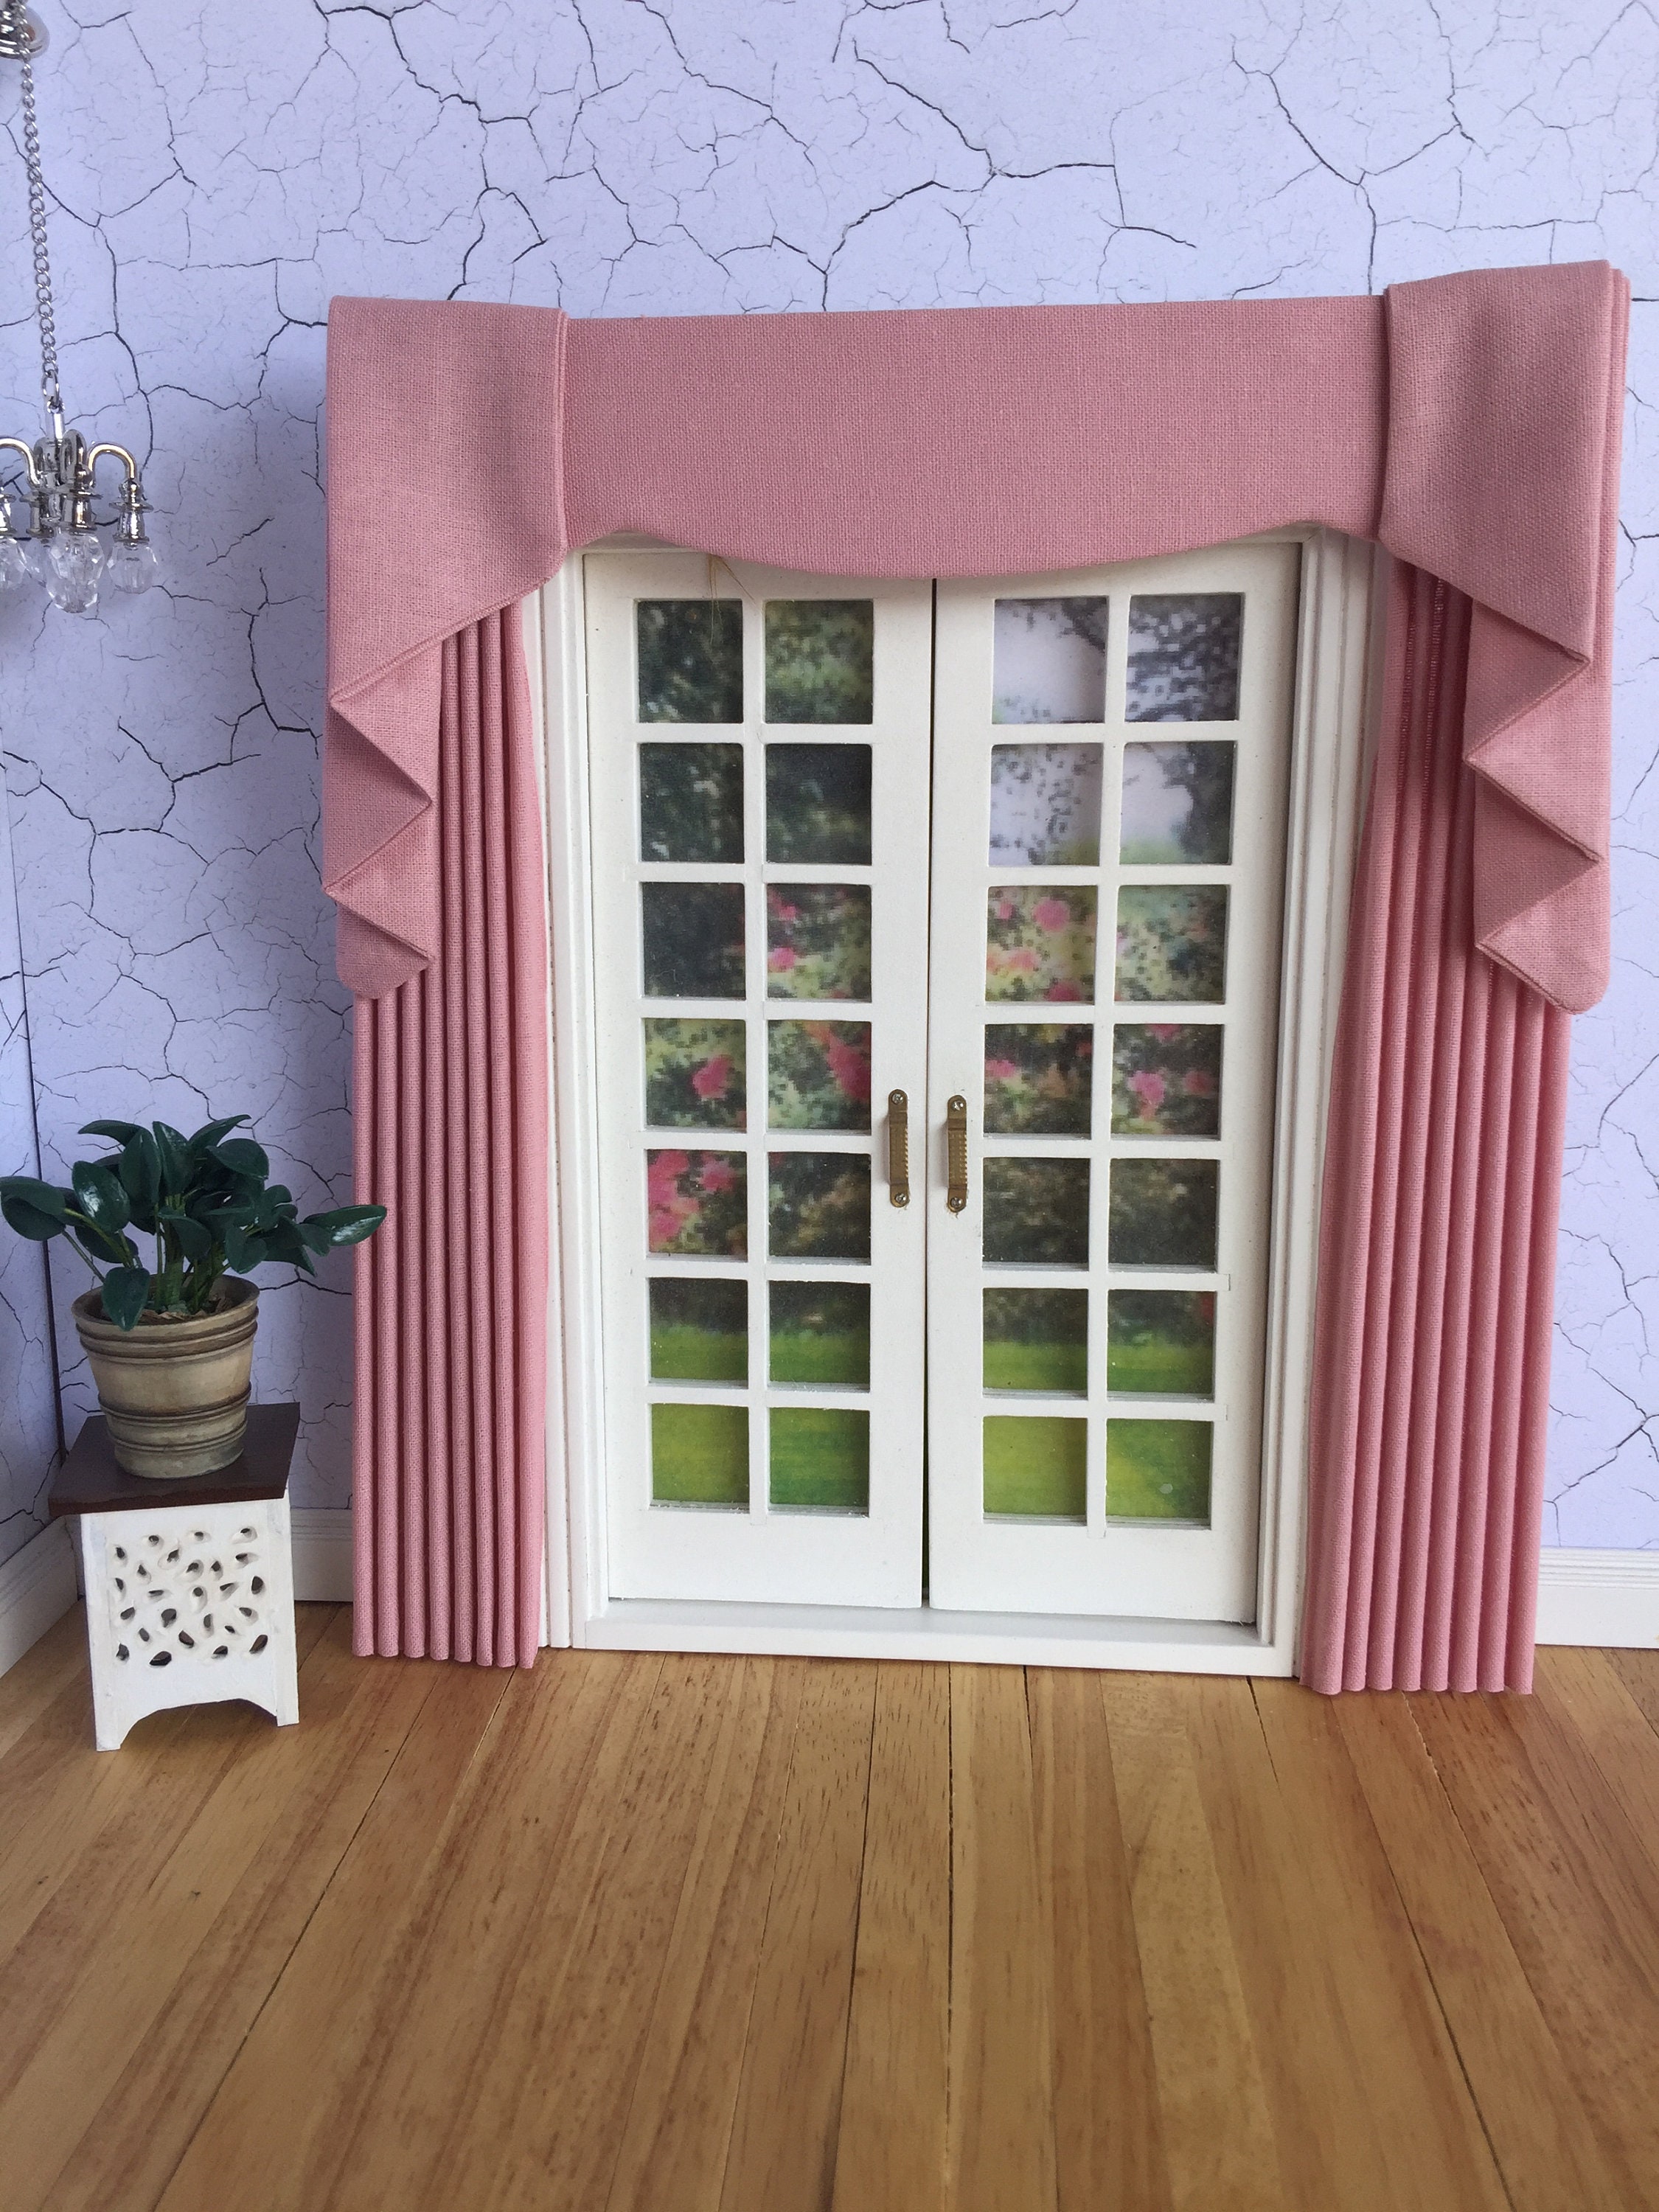 Details about   Dollhouse Miniature Curtains Swag Peach 1:12 one inch scale Y17 Dollys Gallery 